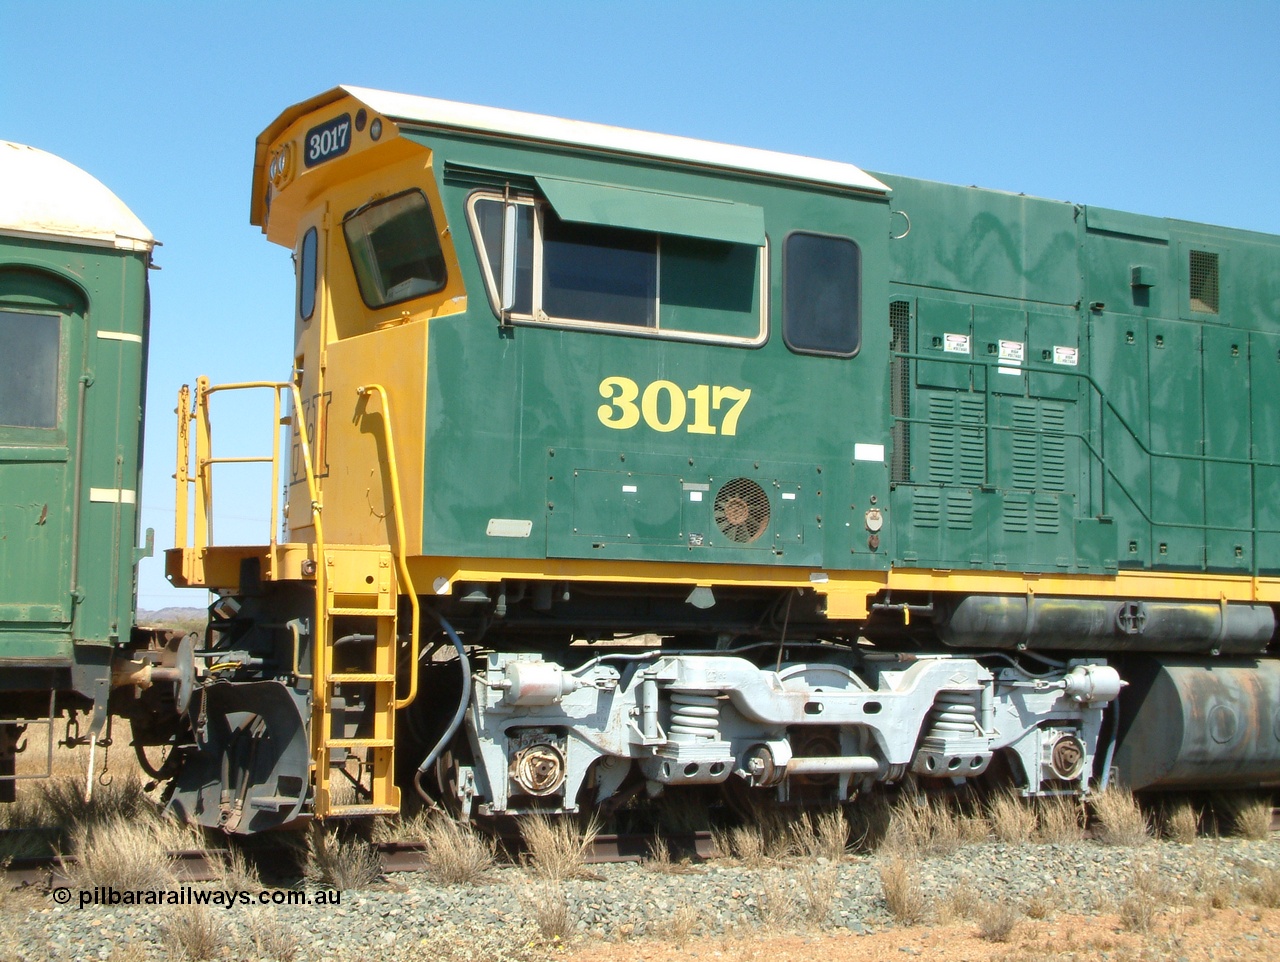 041014 142110
Pilbara Railways Historical Society, Comeng WA ALCo rebuild C636R locomotive 3017 serial WA-135-C-6043-04. The improved Pilbara cab was fitted as part of the rebuild in April 1985. Donated to Society in 1996. 14th October 2004.
Keywords: 3017;Comeng-WA;ALCo;C636R;WA-135-C-6043-04;rebuild;